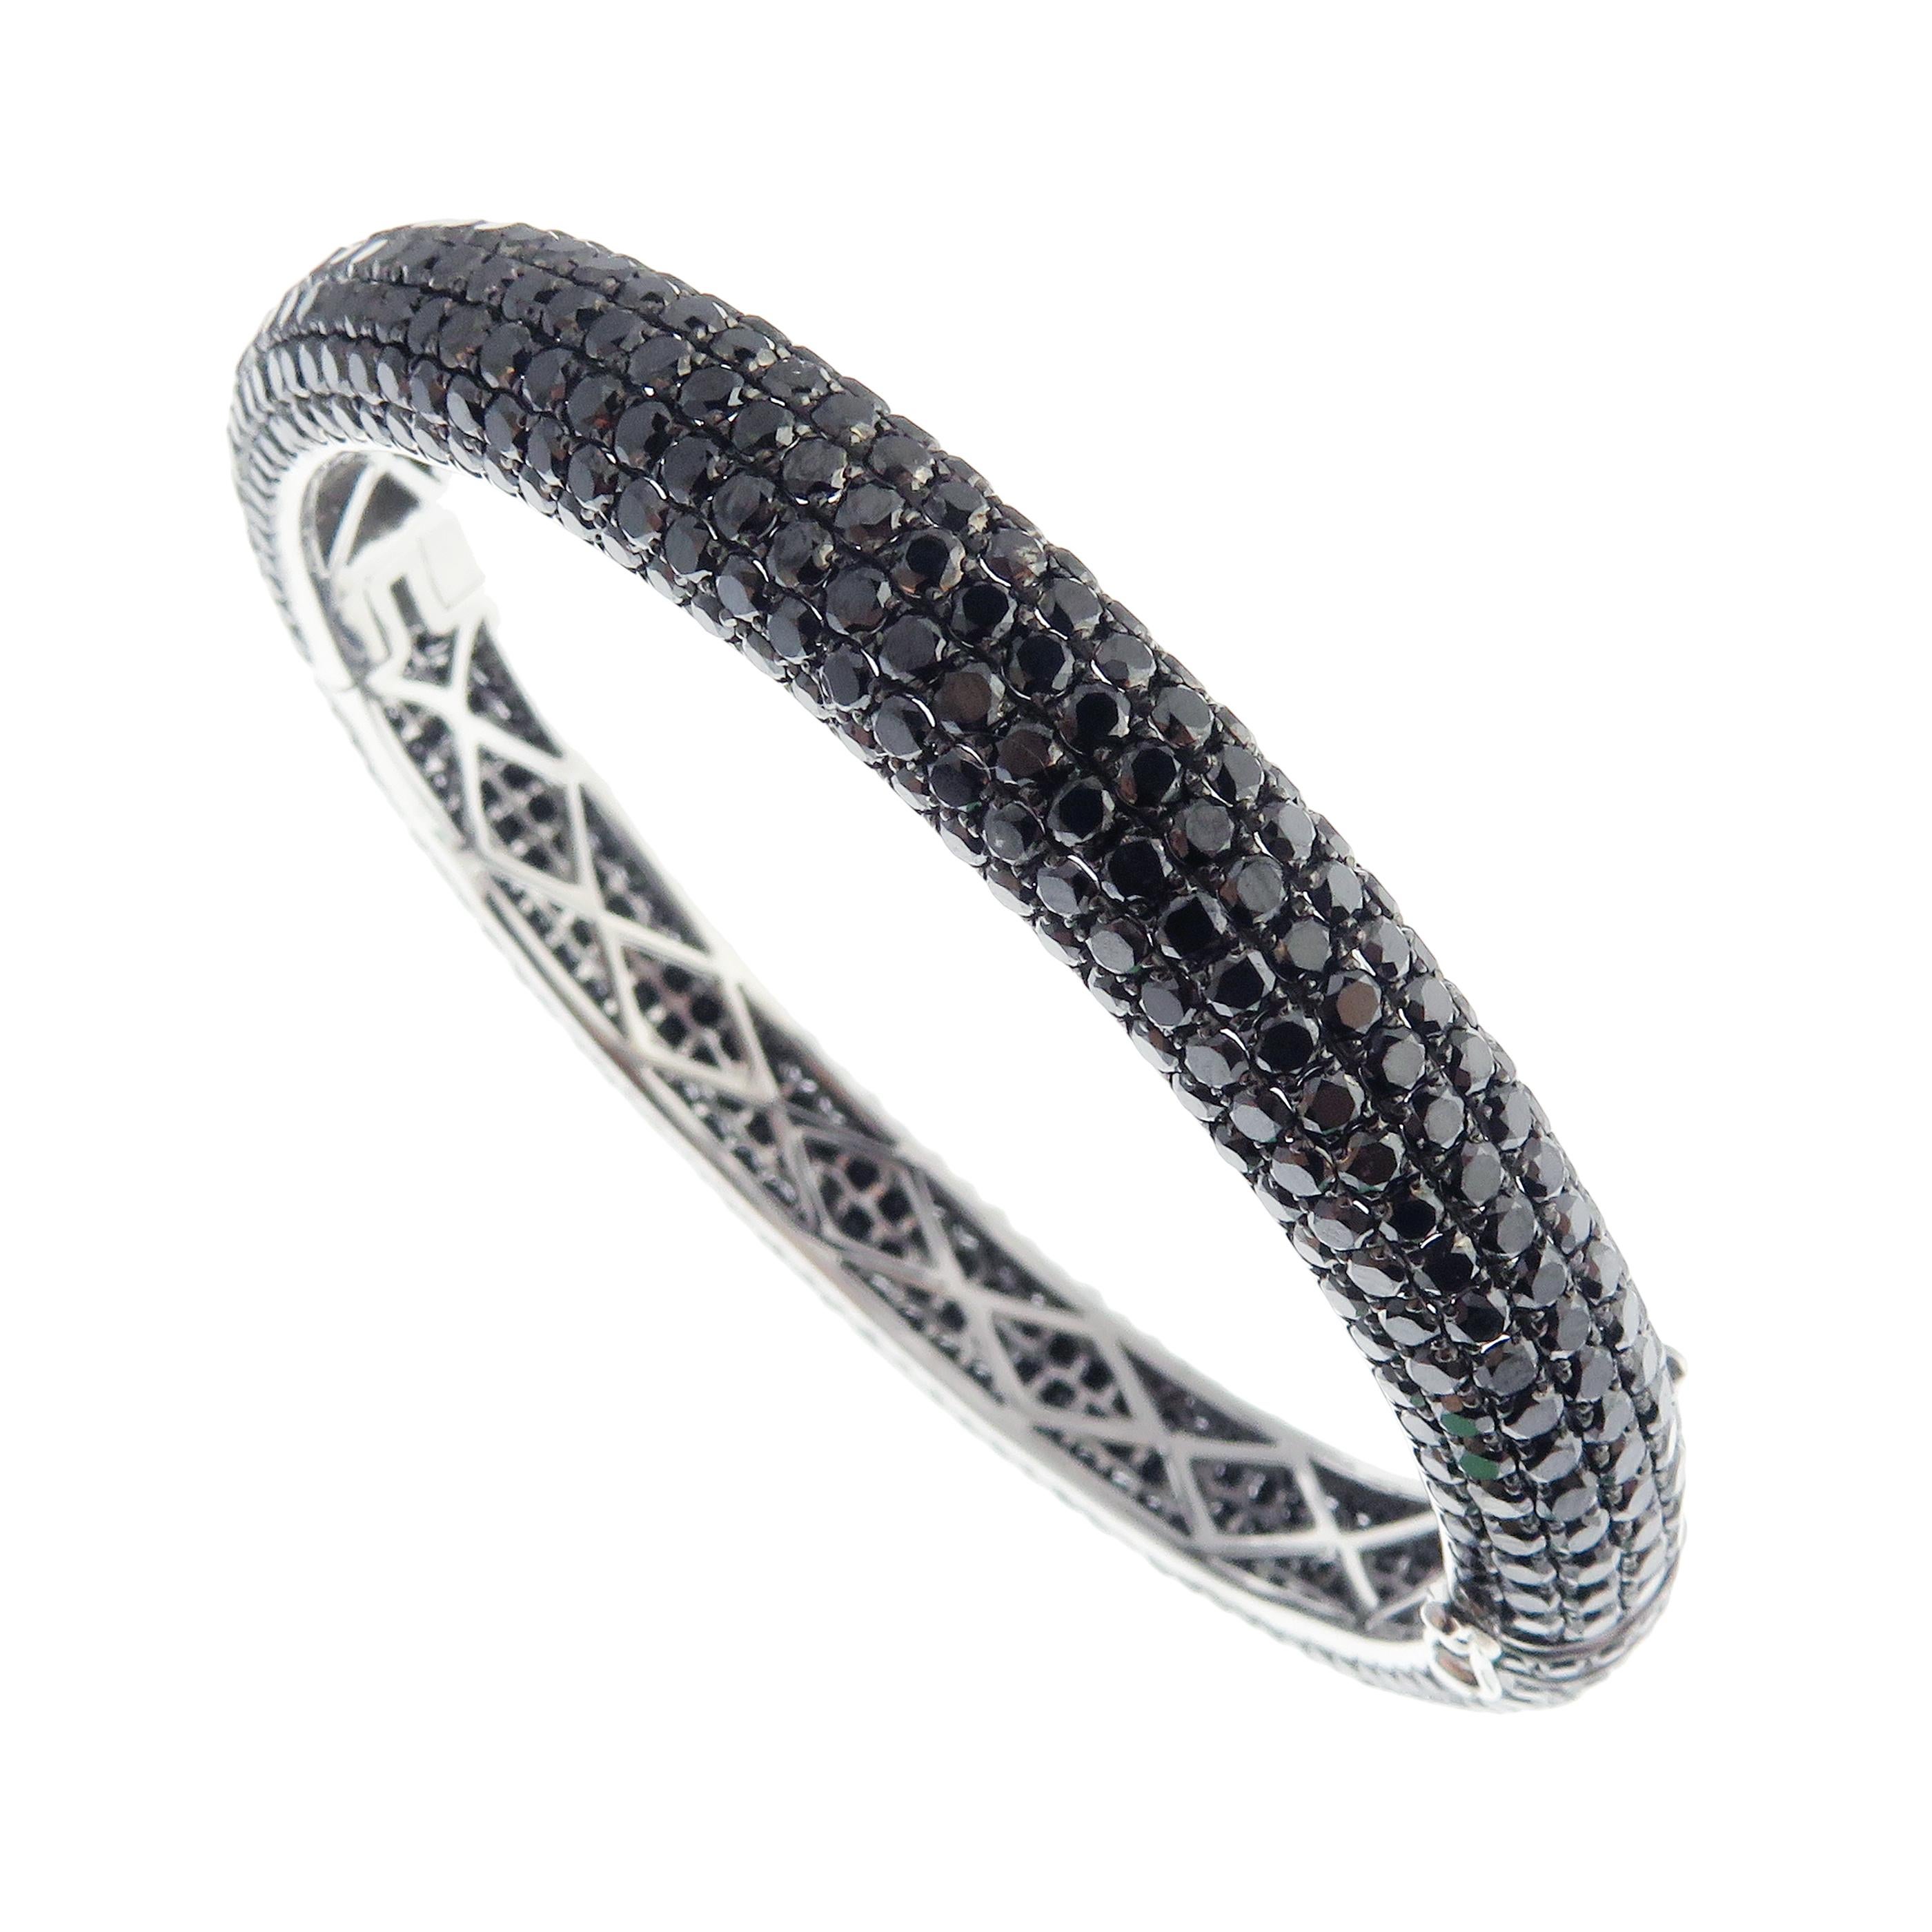 This classic pave bangle is crafted in 18-karat white gold, weighing approximately 22.90 total carats of black diamonds. This bangle has diamond all 

around for a 